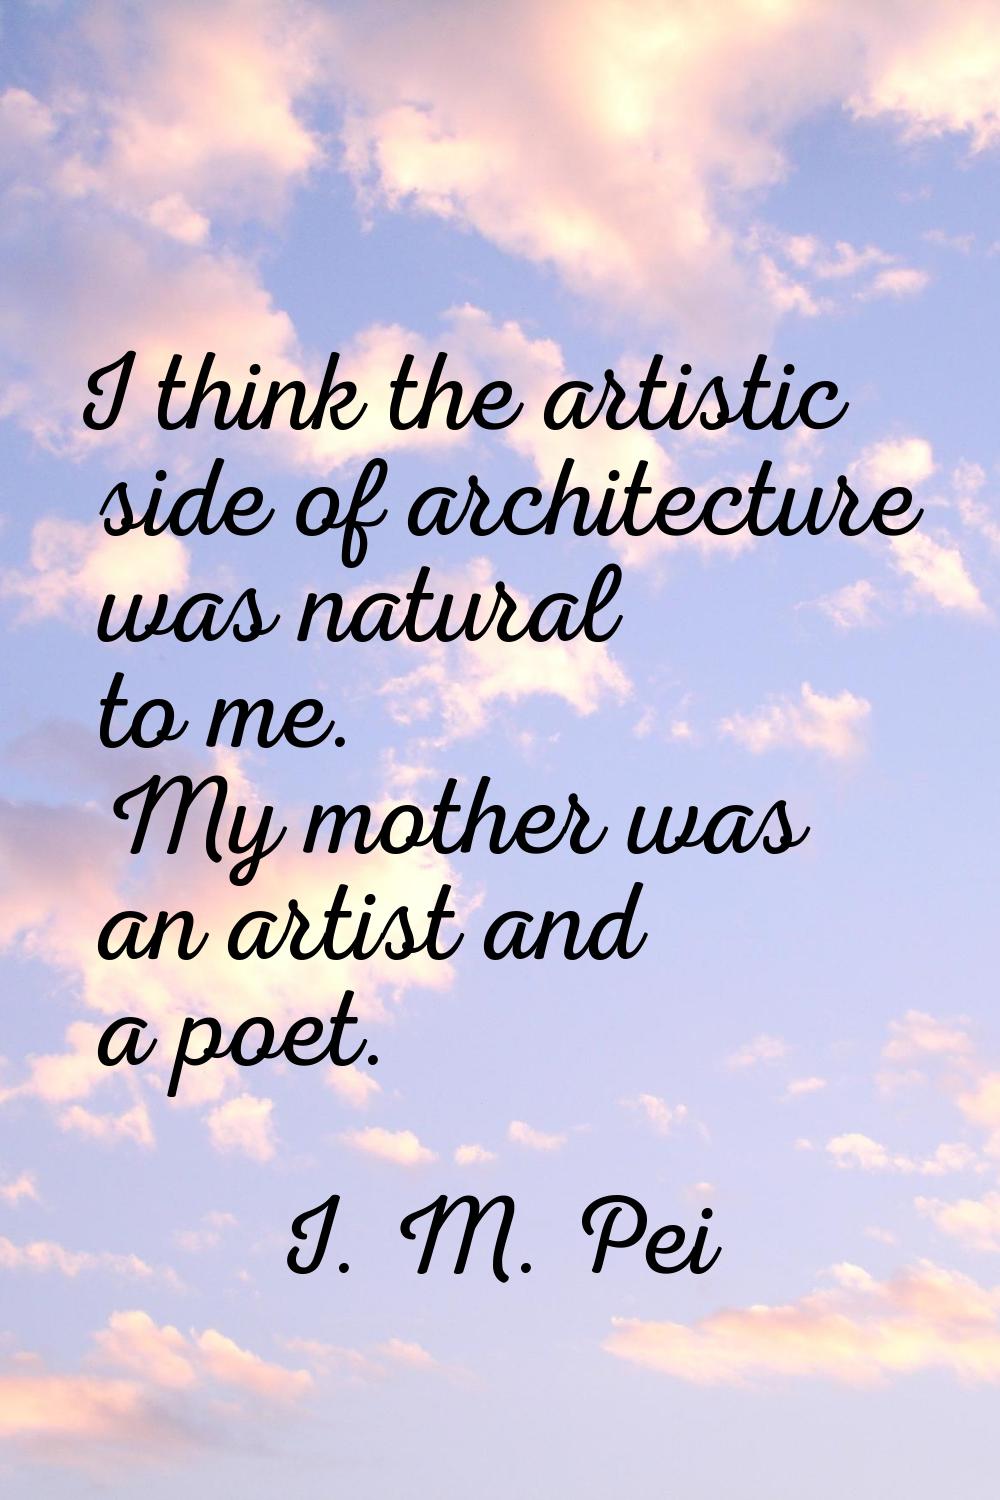 I think the artistic side of architecture was natural to me. My mother was an artist and a poet.